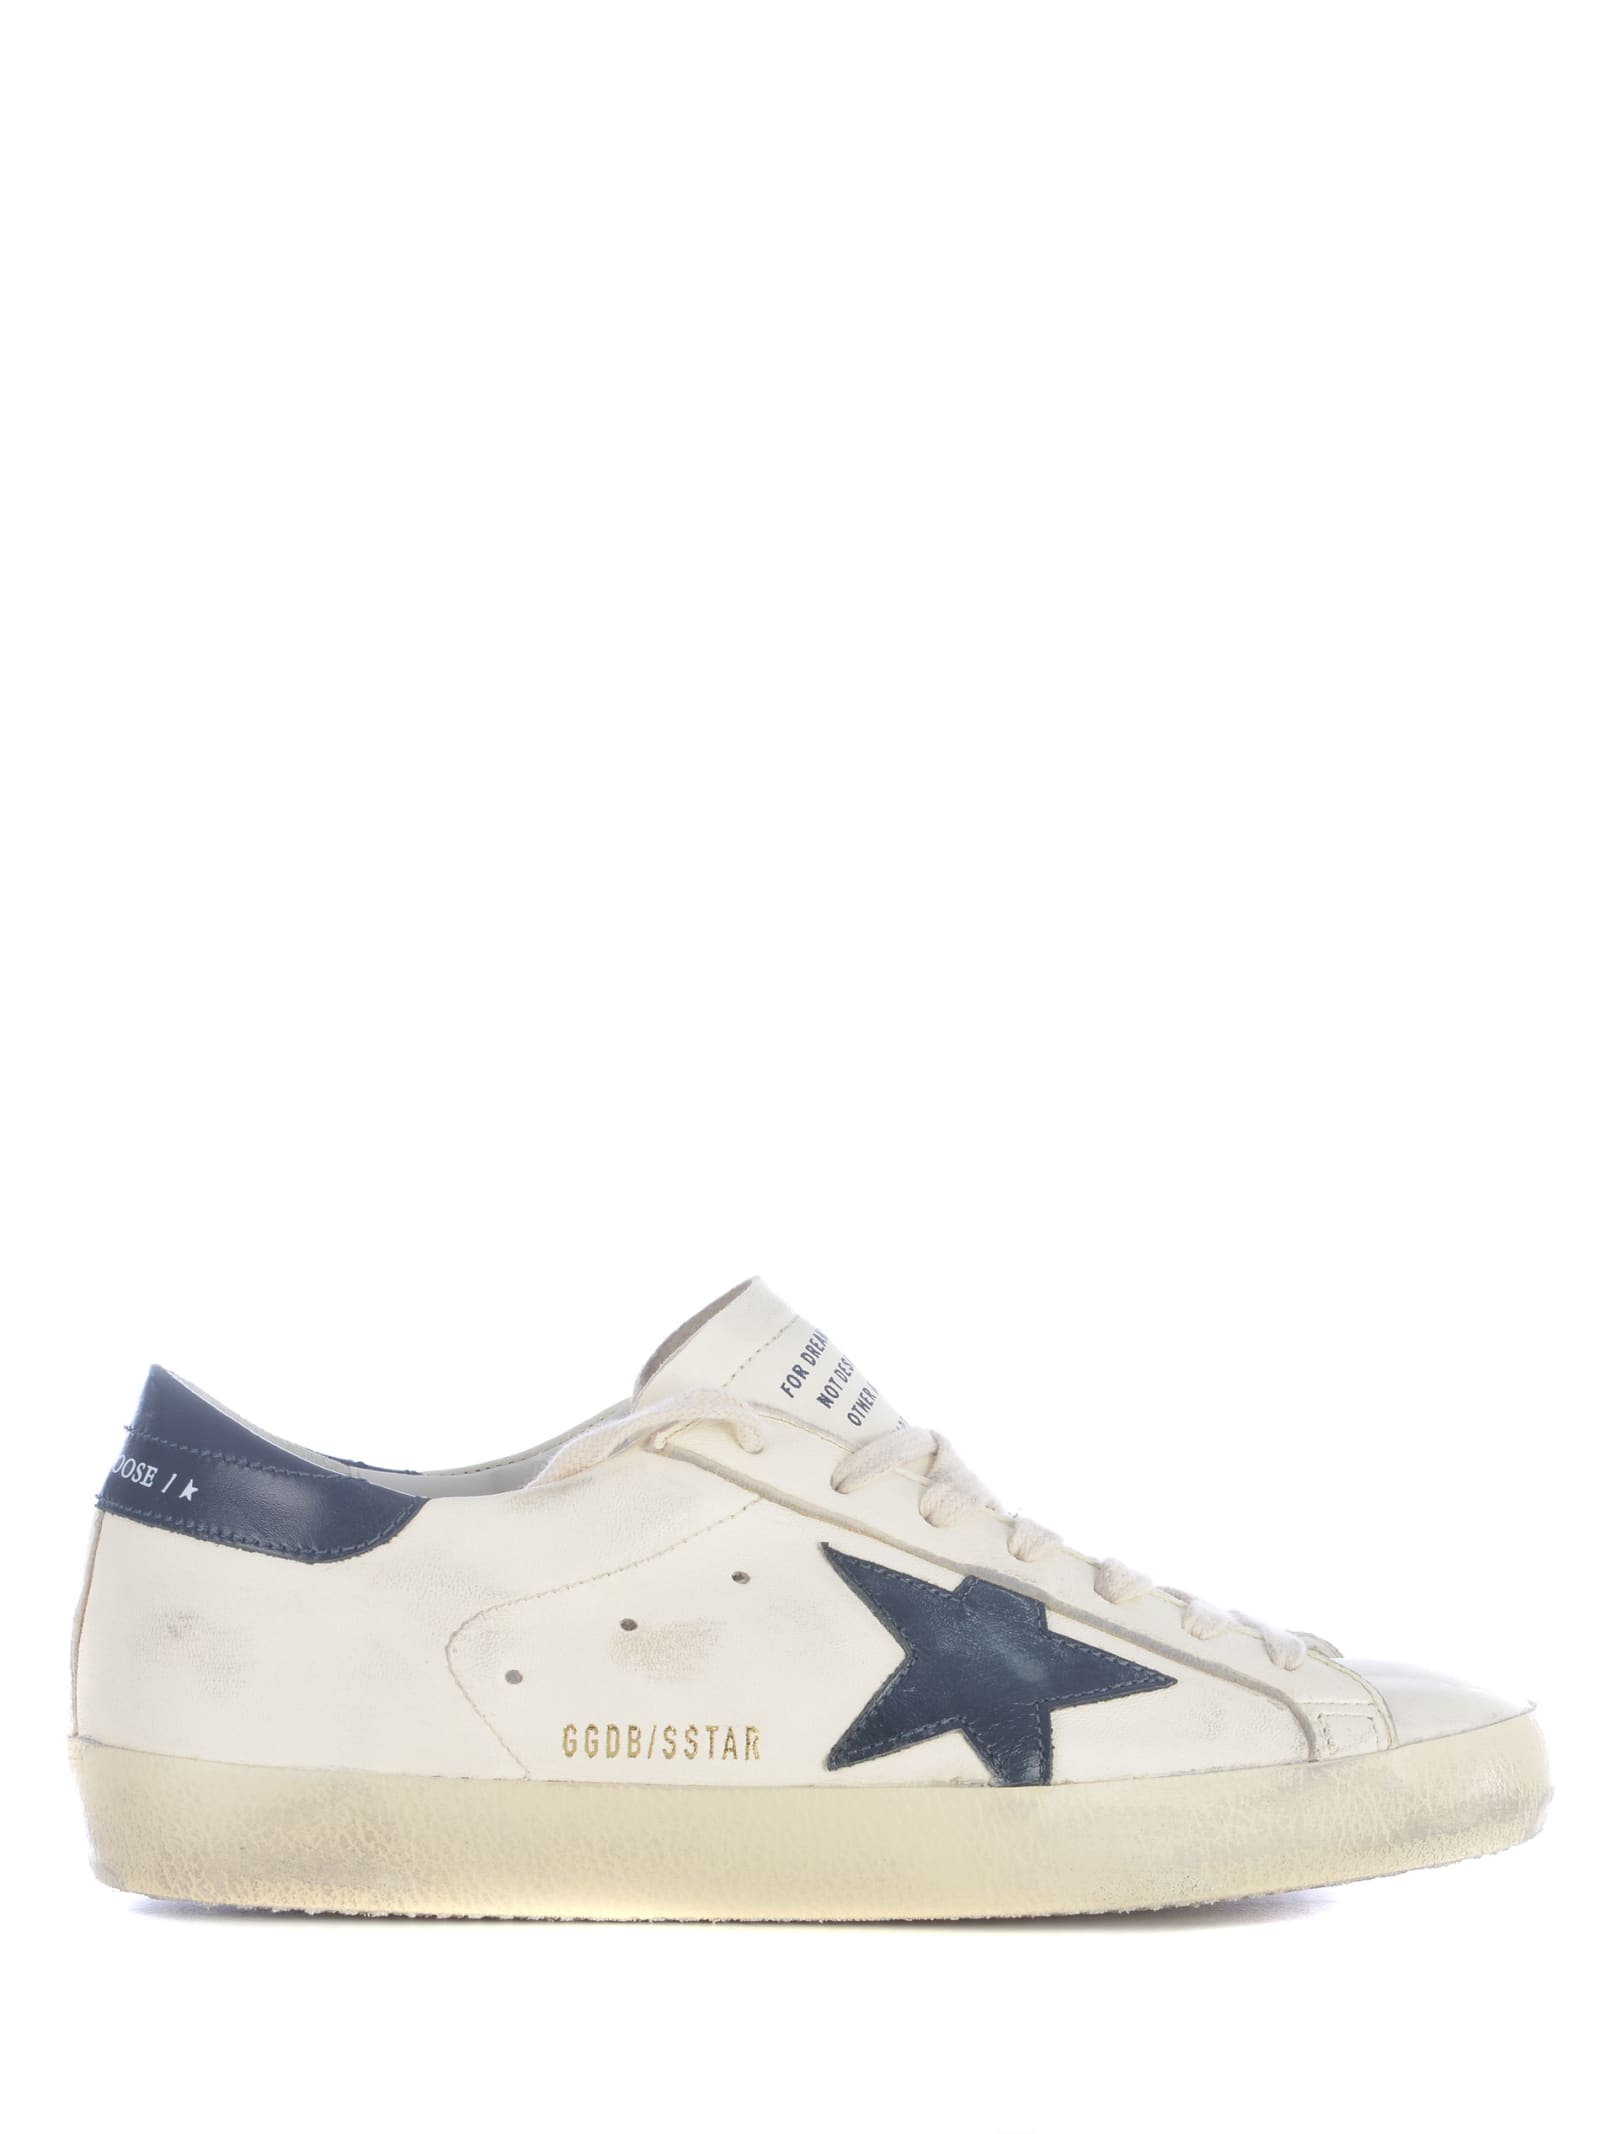 Sneakers Golden Gooose super Star Made Of Leather